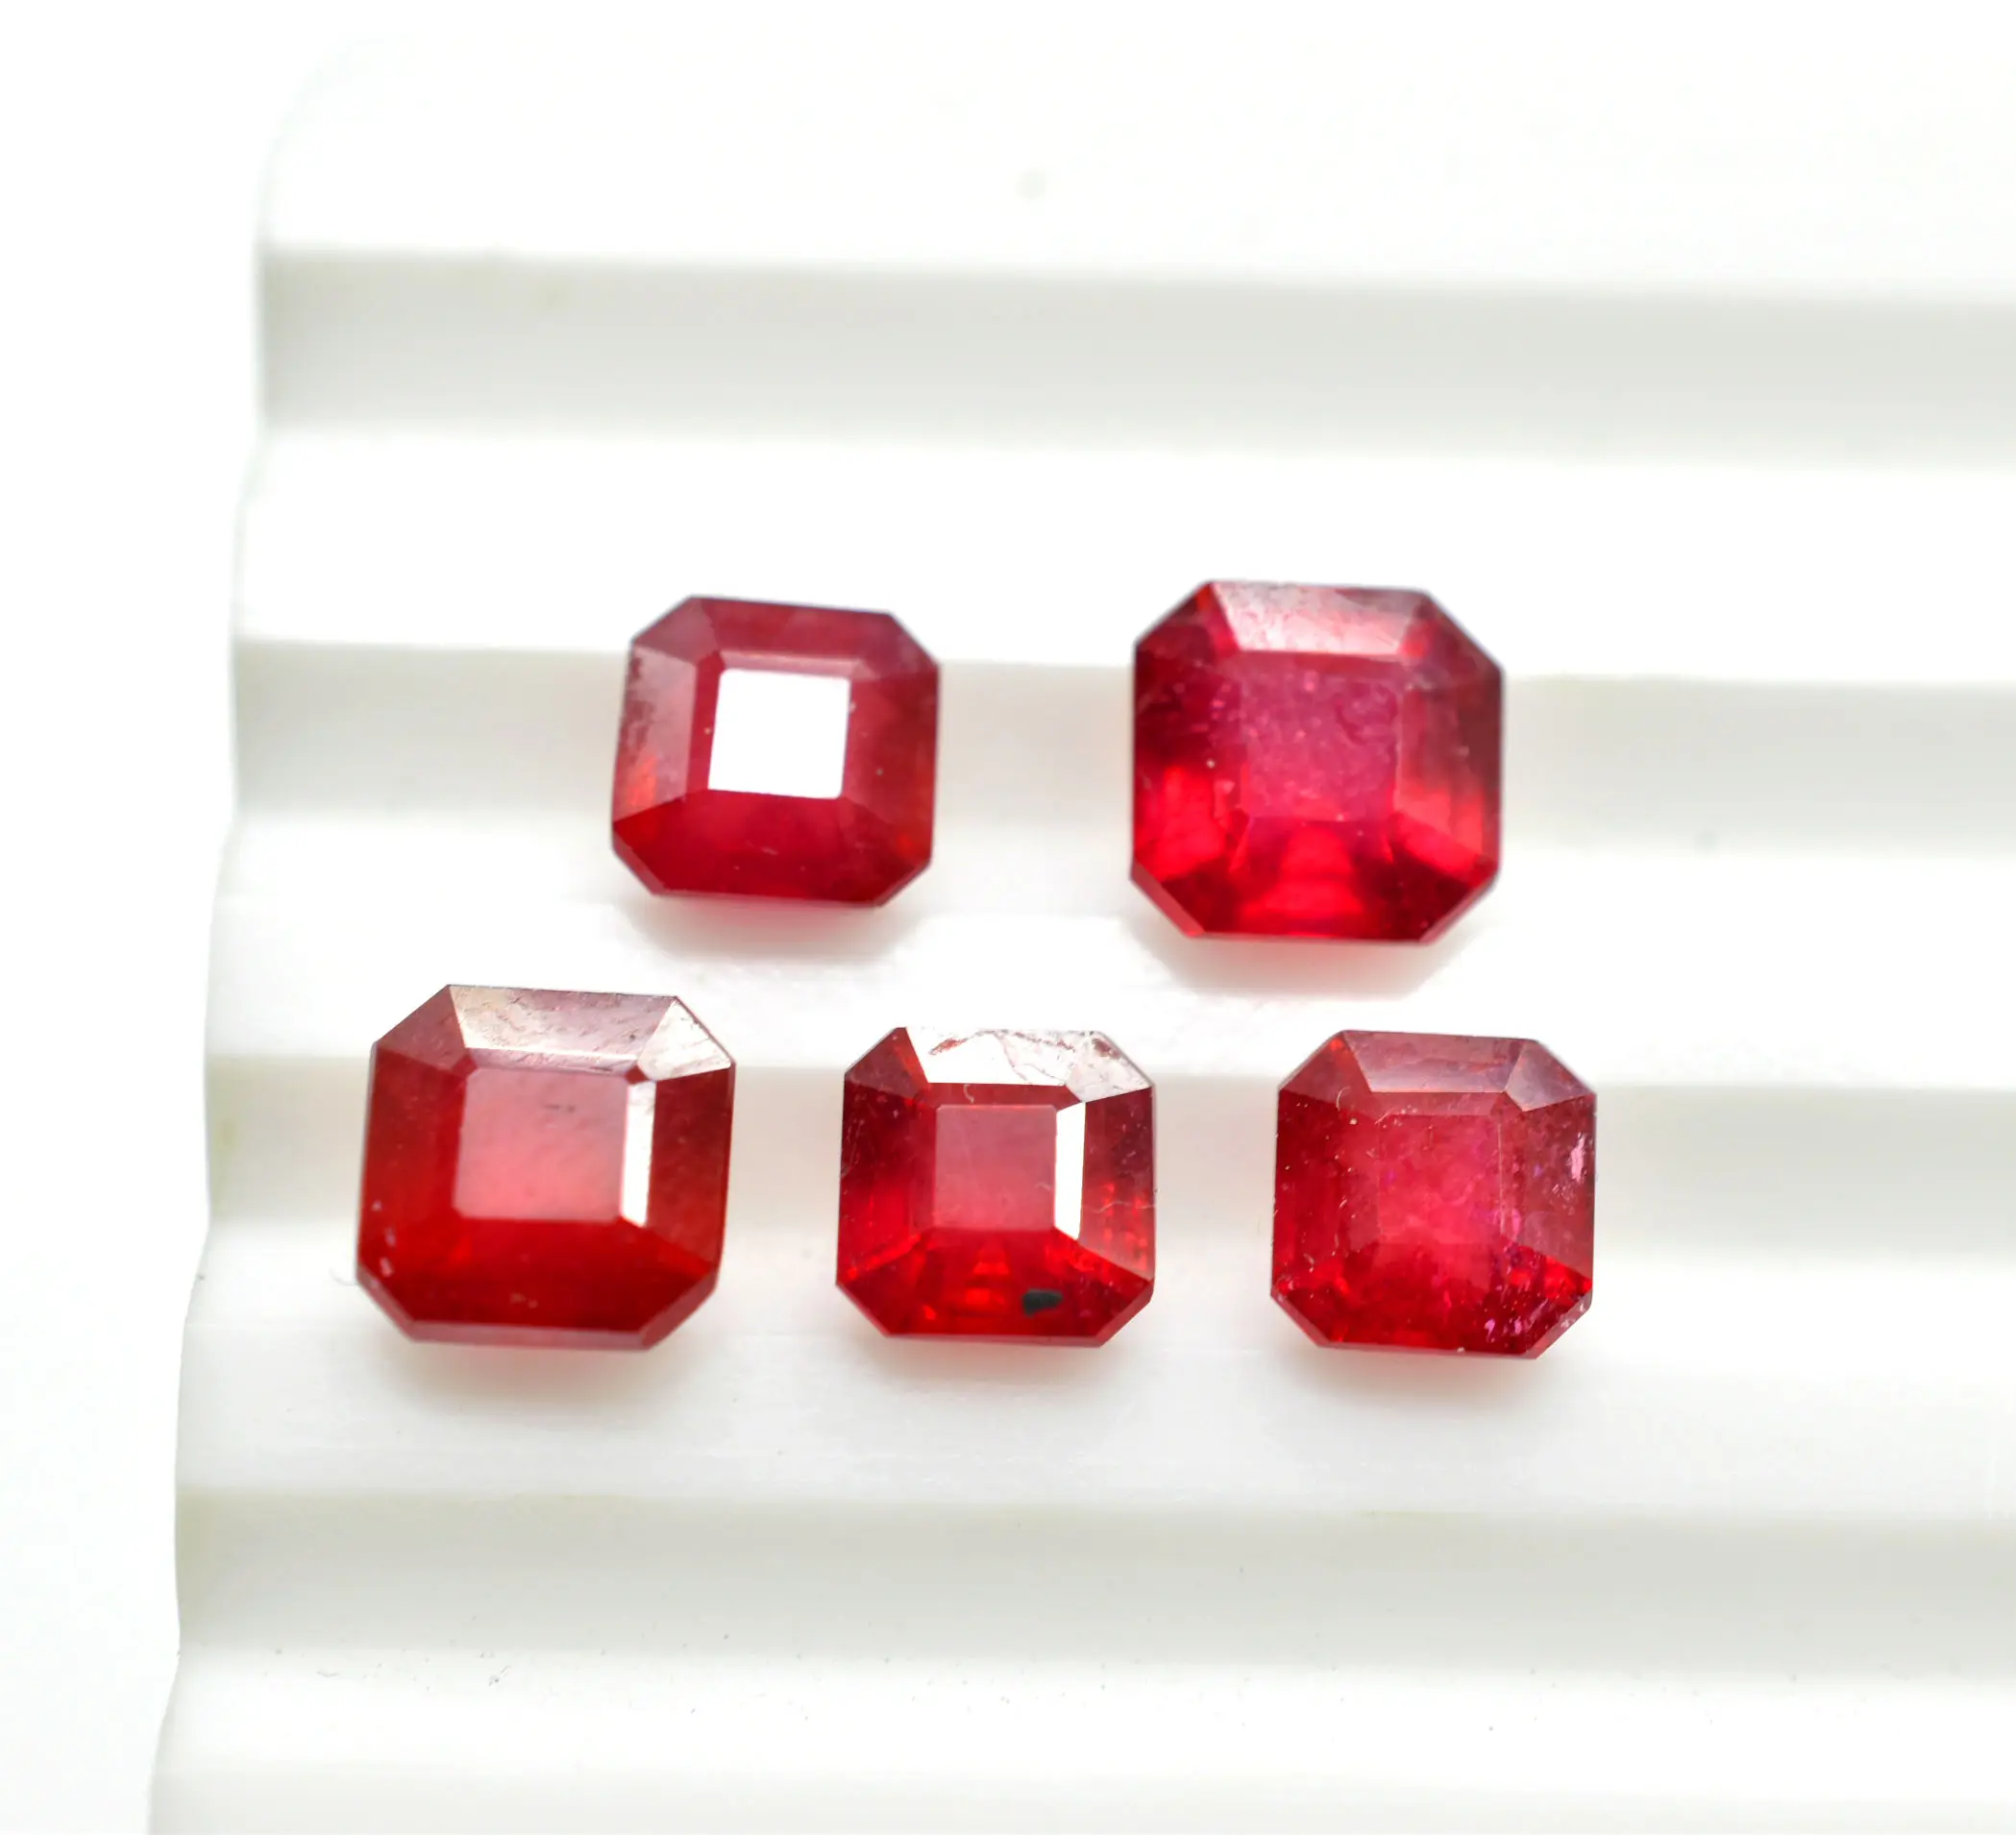 Ruby Square Octagon Faceted Natural Gemstone Top Quality 3 mm To 20 mm Loose Gemstones For Jewelry Ring Pendant Necklace.